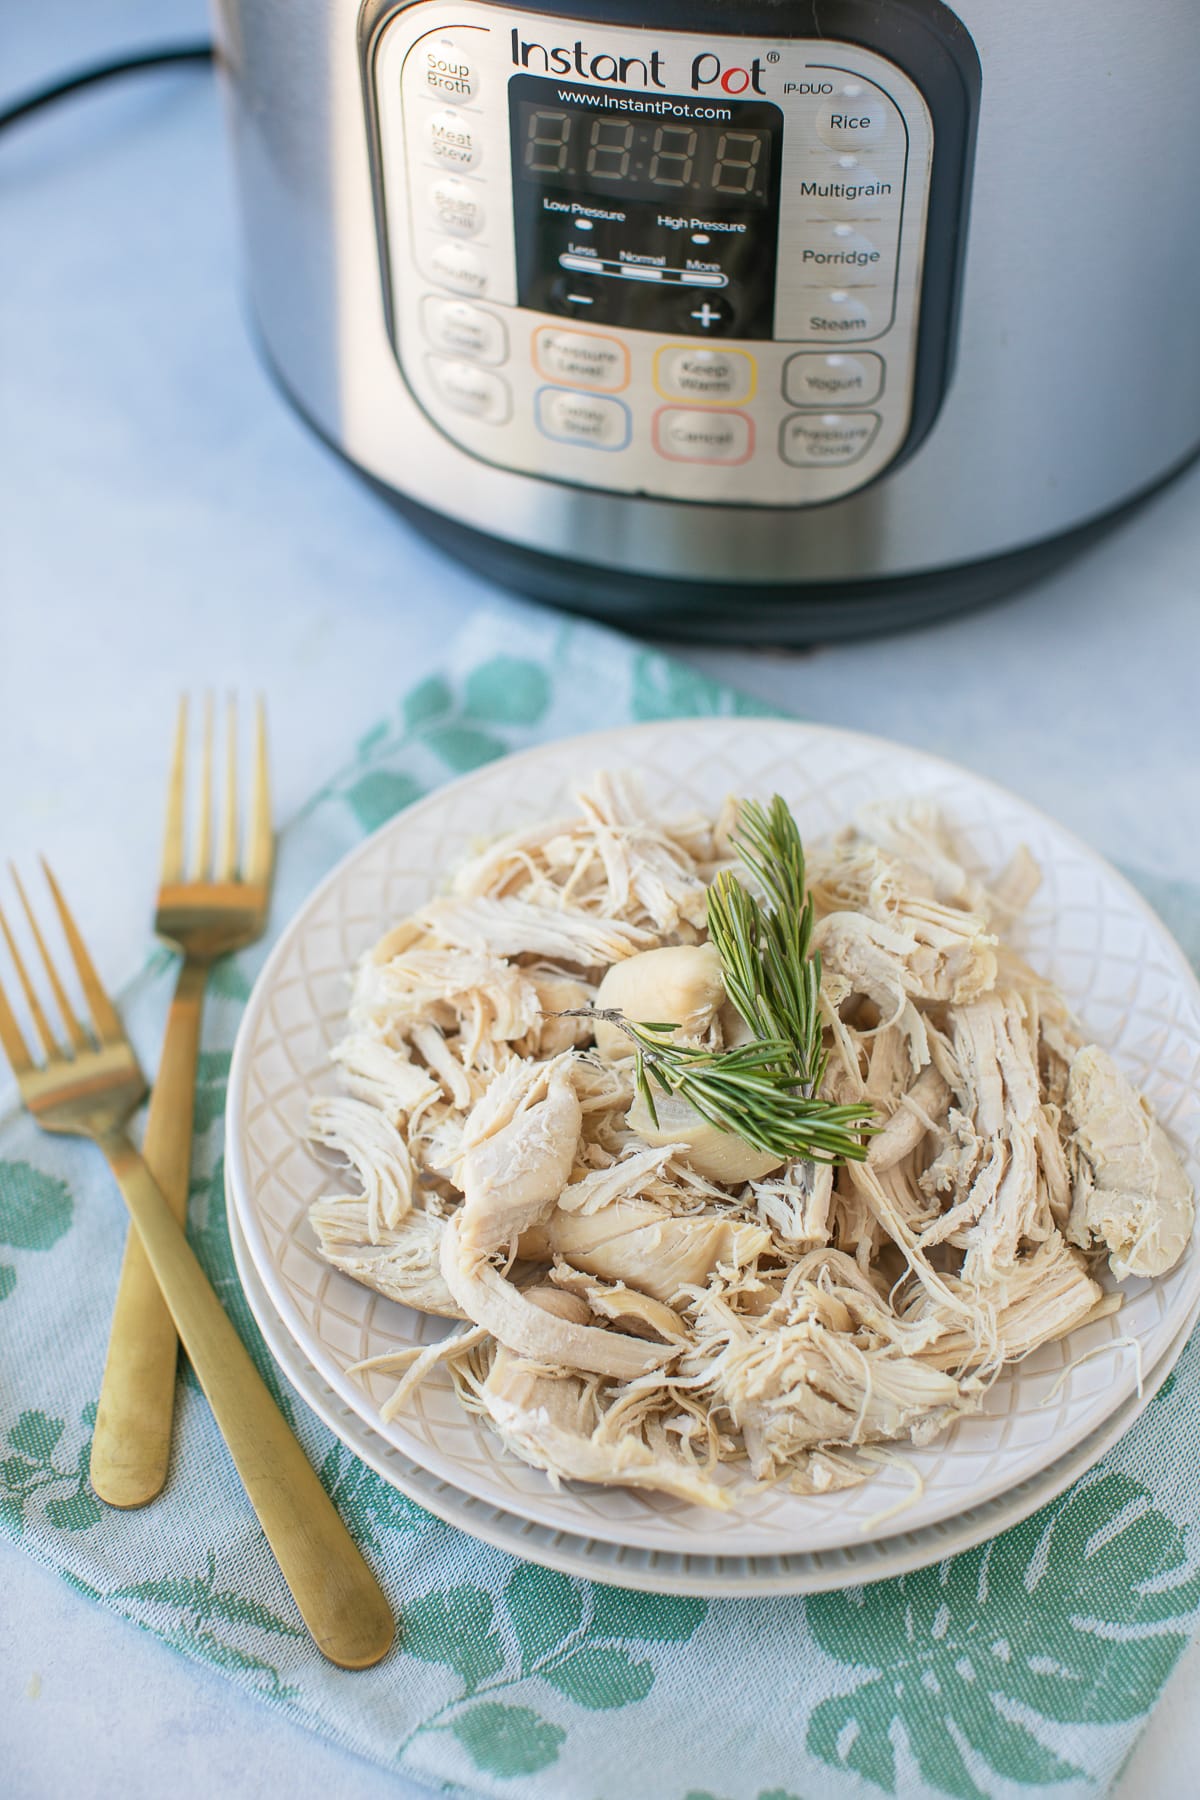 shredded chicken on a plate with the Instant Pot in the background